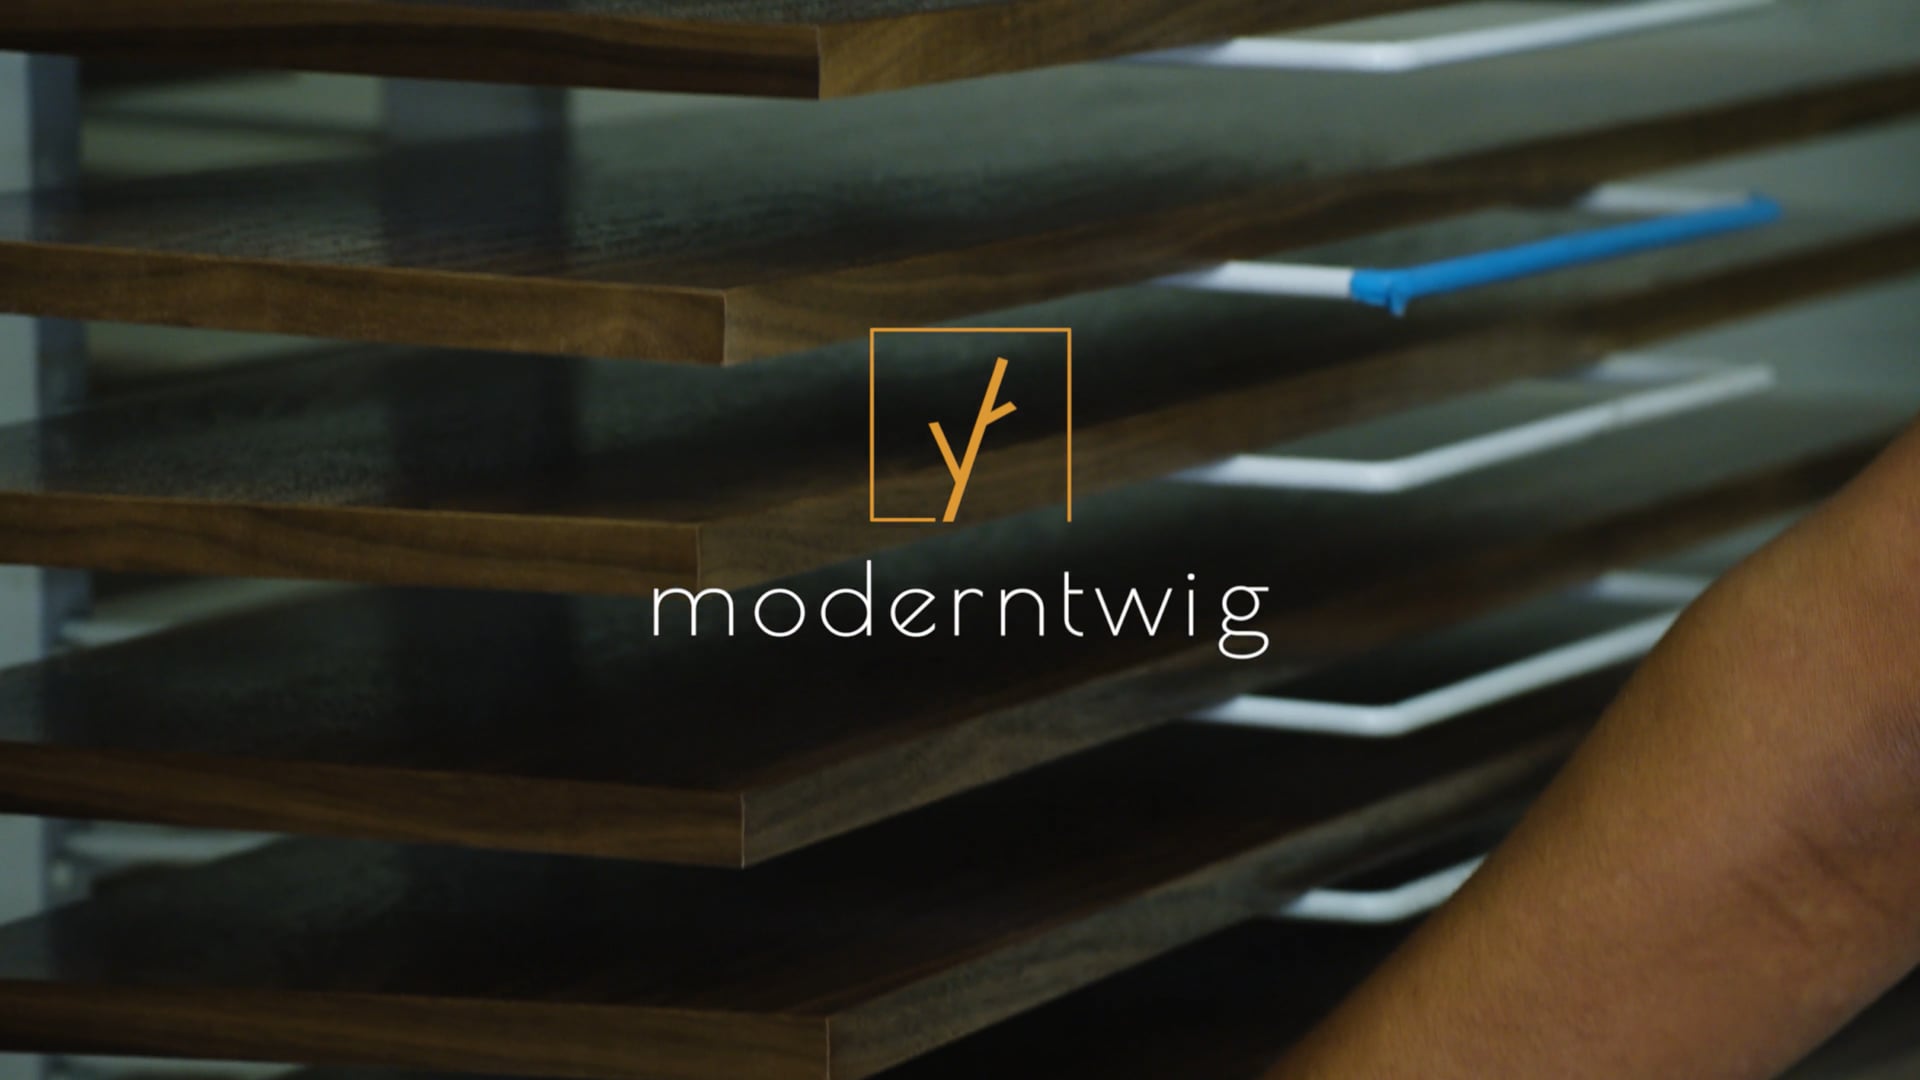 Video promo - Introduction video "Modern twig"